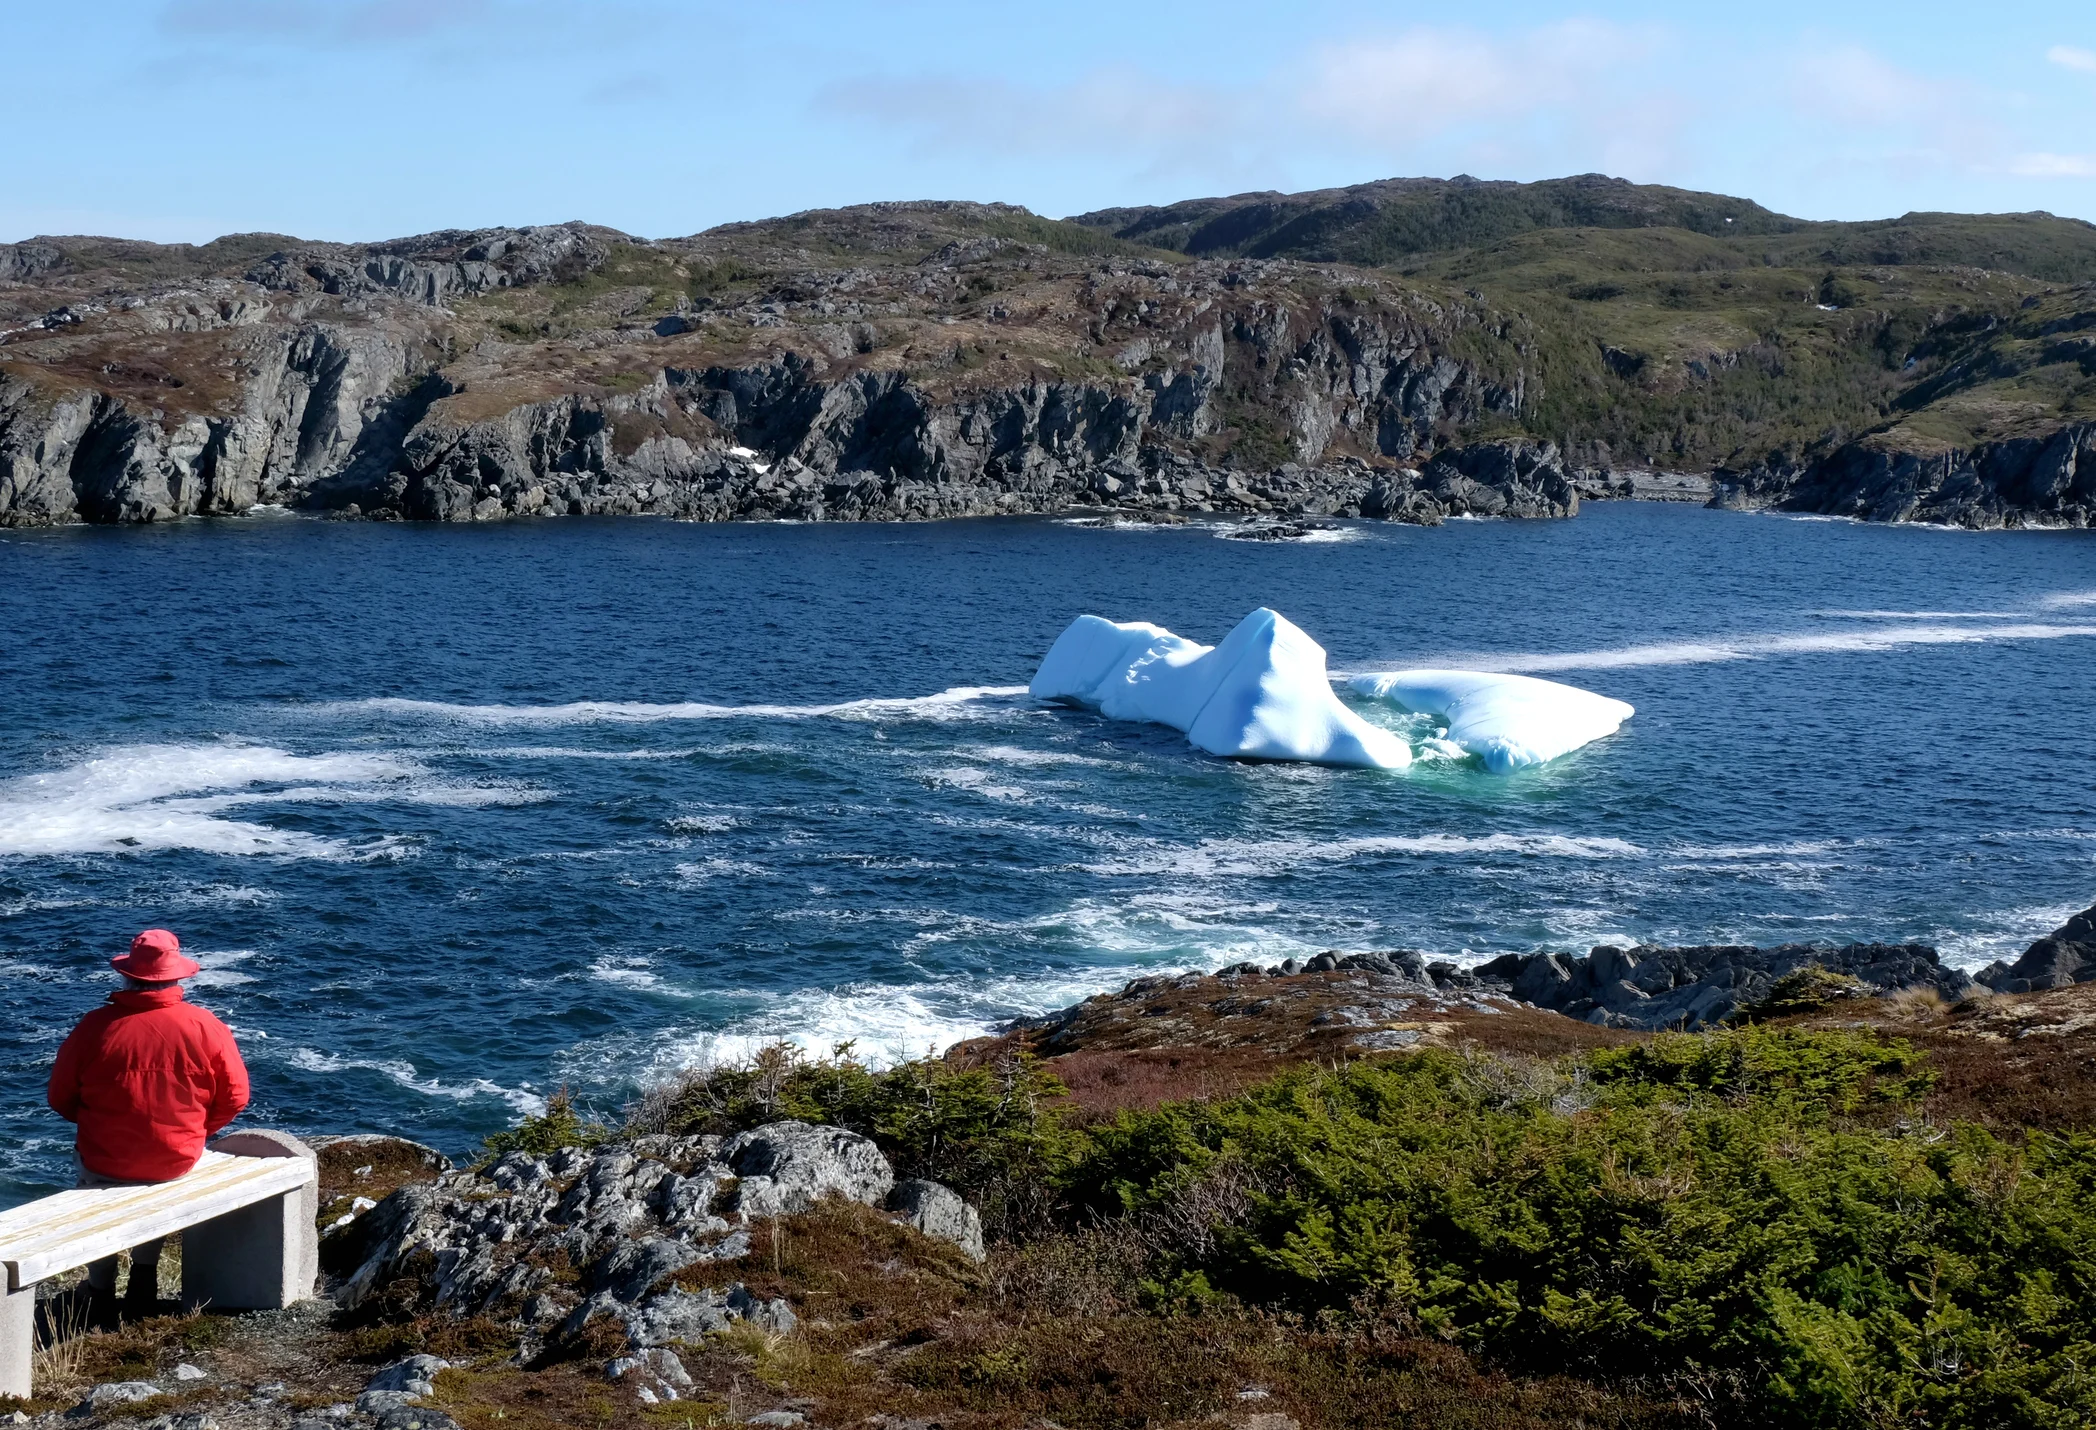 Iceberg watching in Great Brehat Bay, Newfoundland. Credit: Sandra Leidholdt. Moment. Getty Images